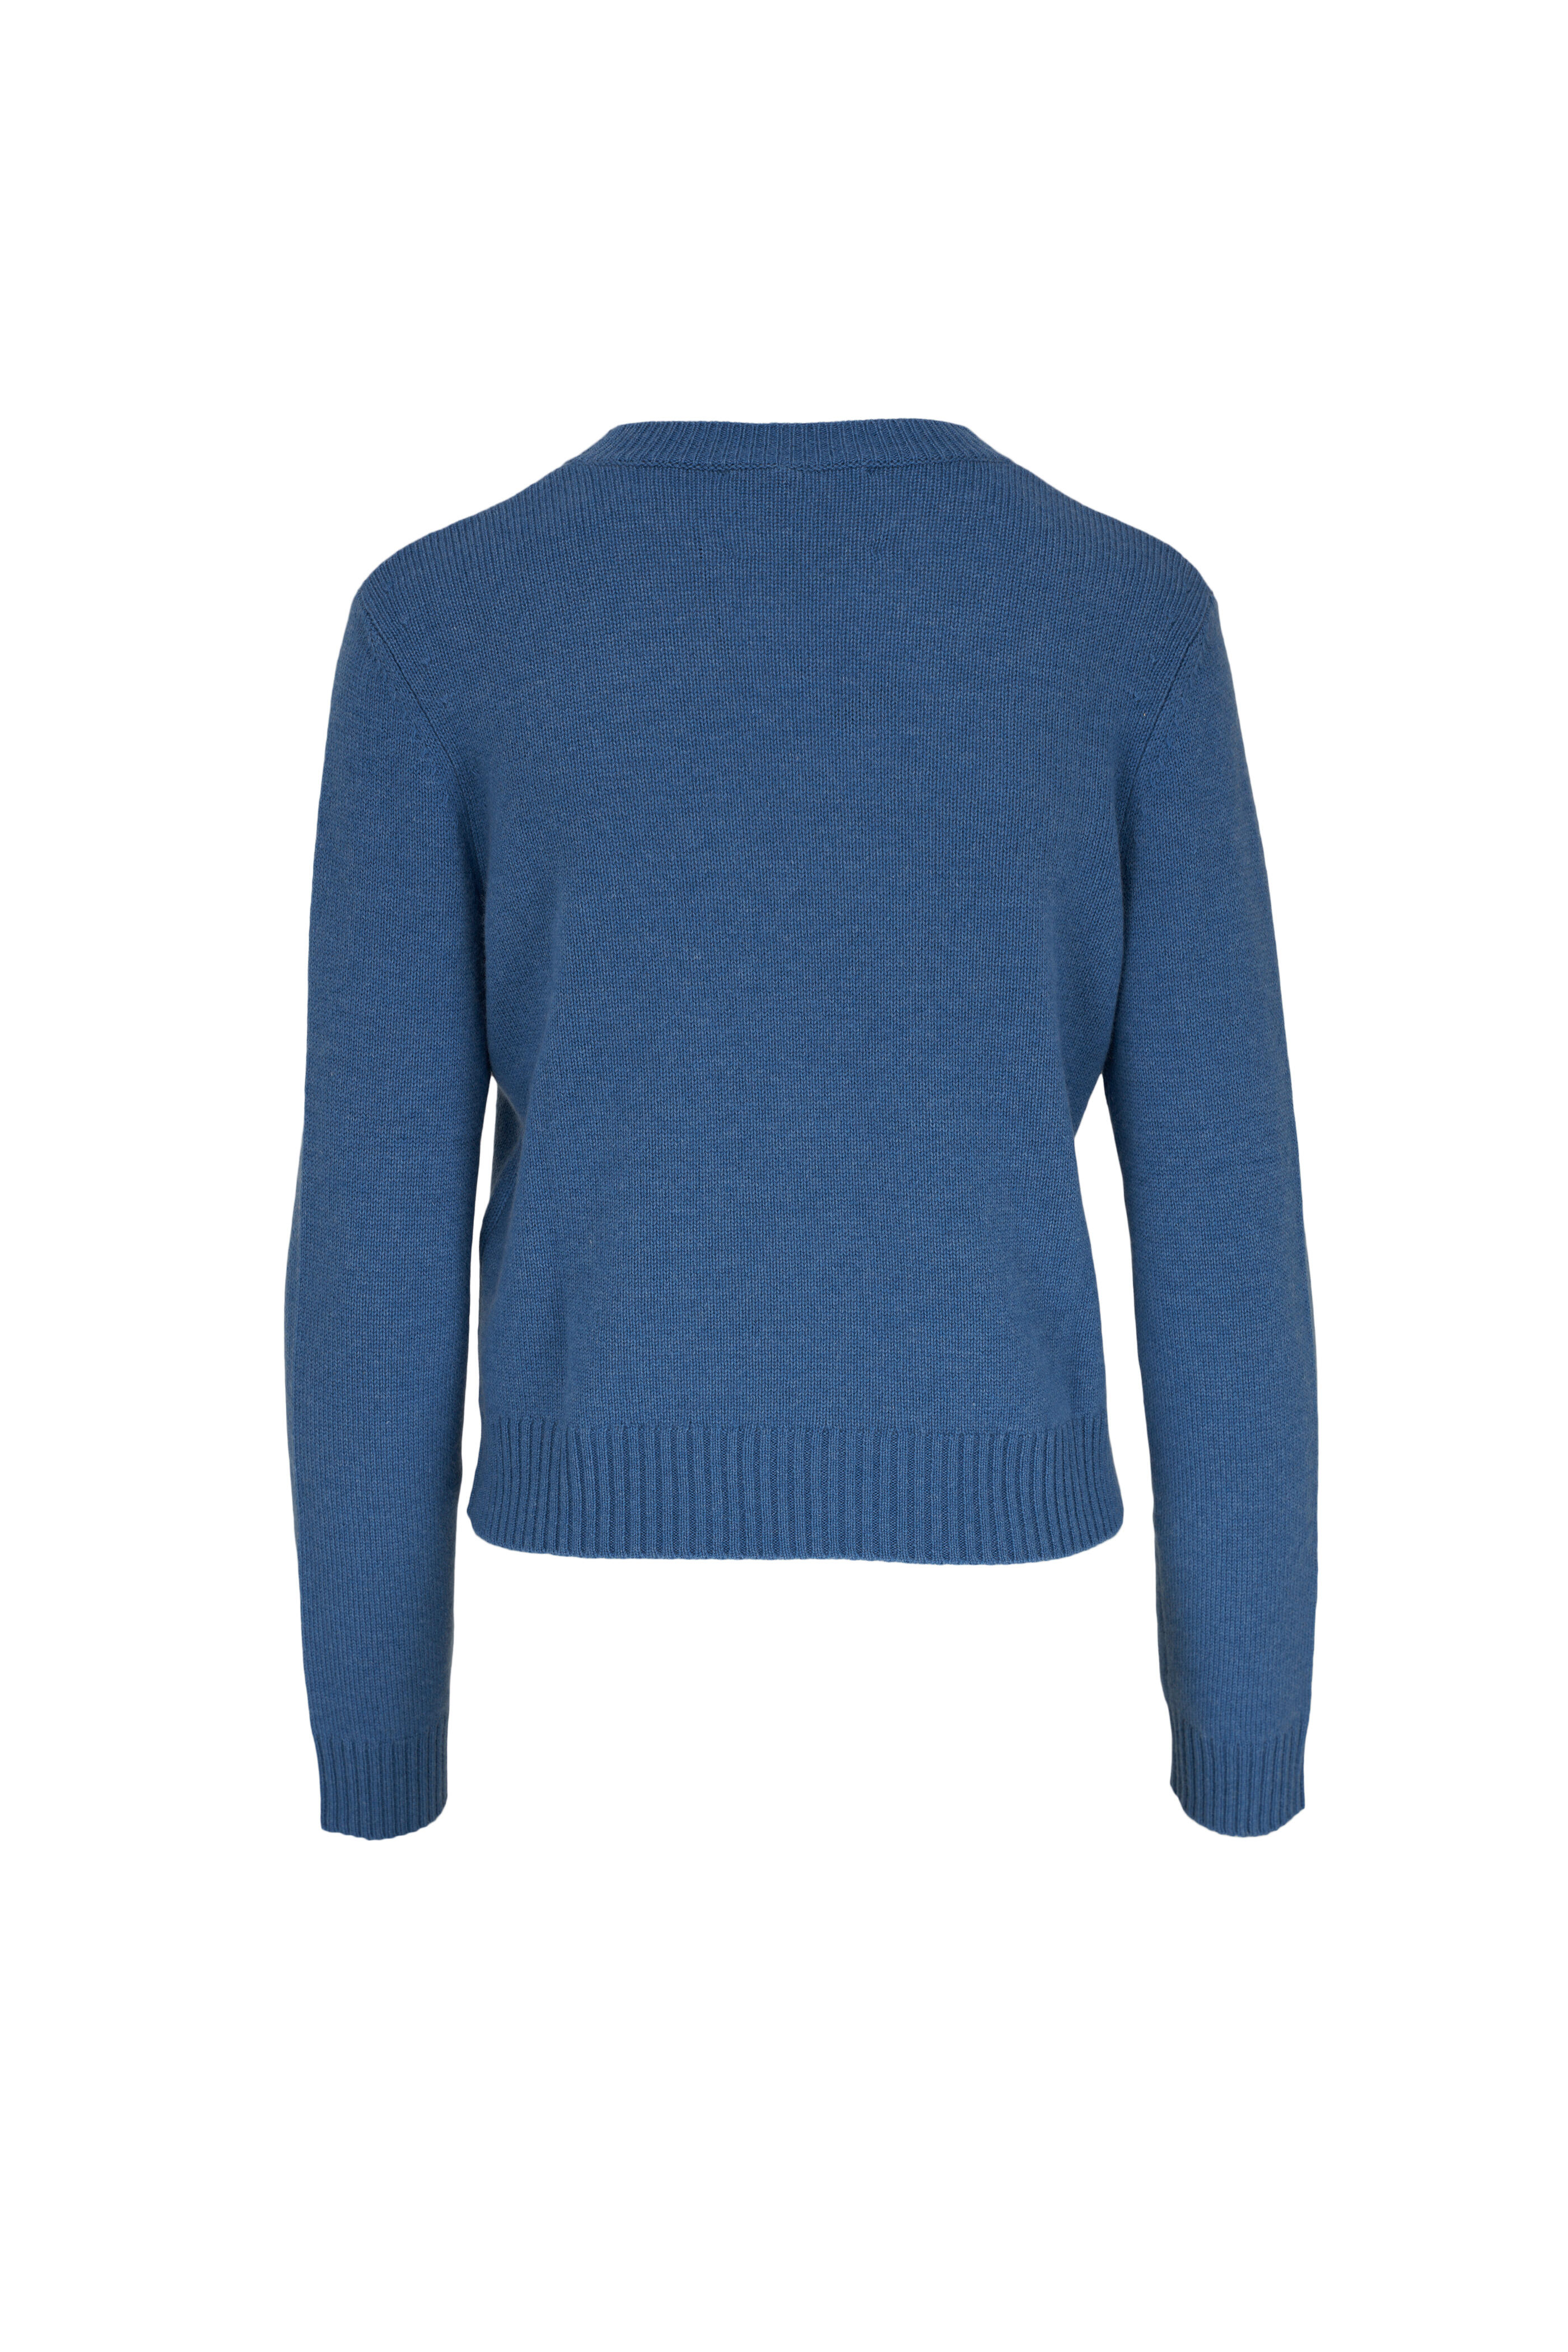 Lisa Yang - Mable Stormy Blue Cashmere Sweater | Mitchell Stores